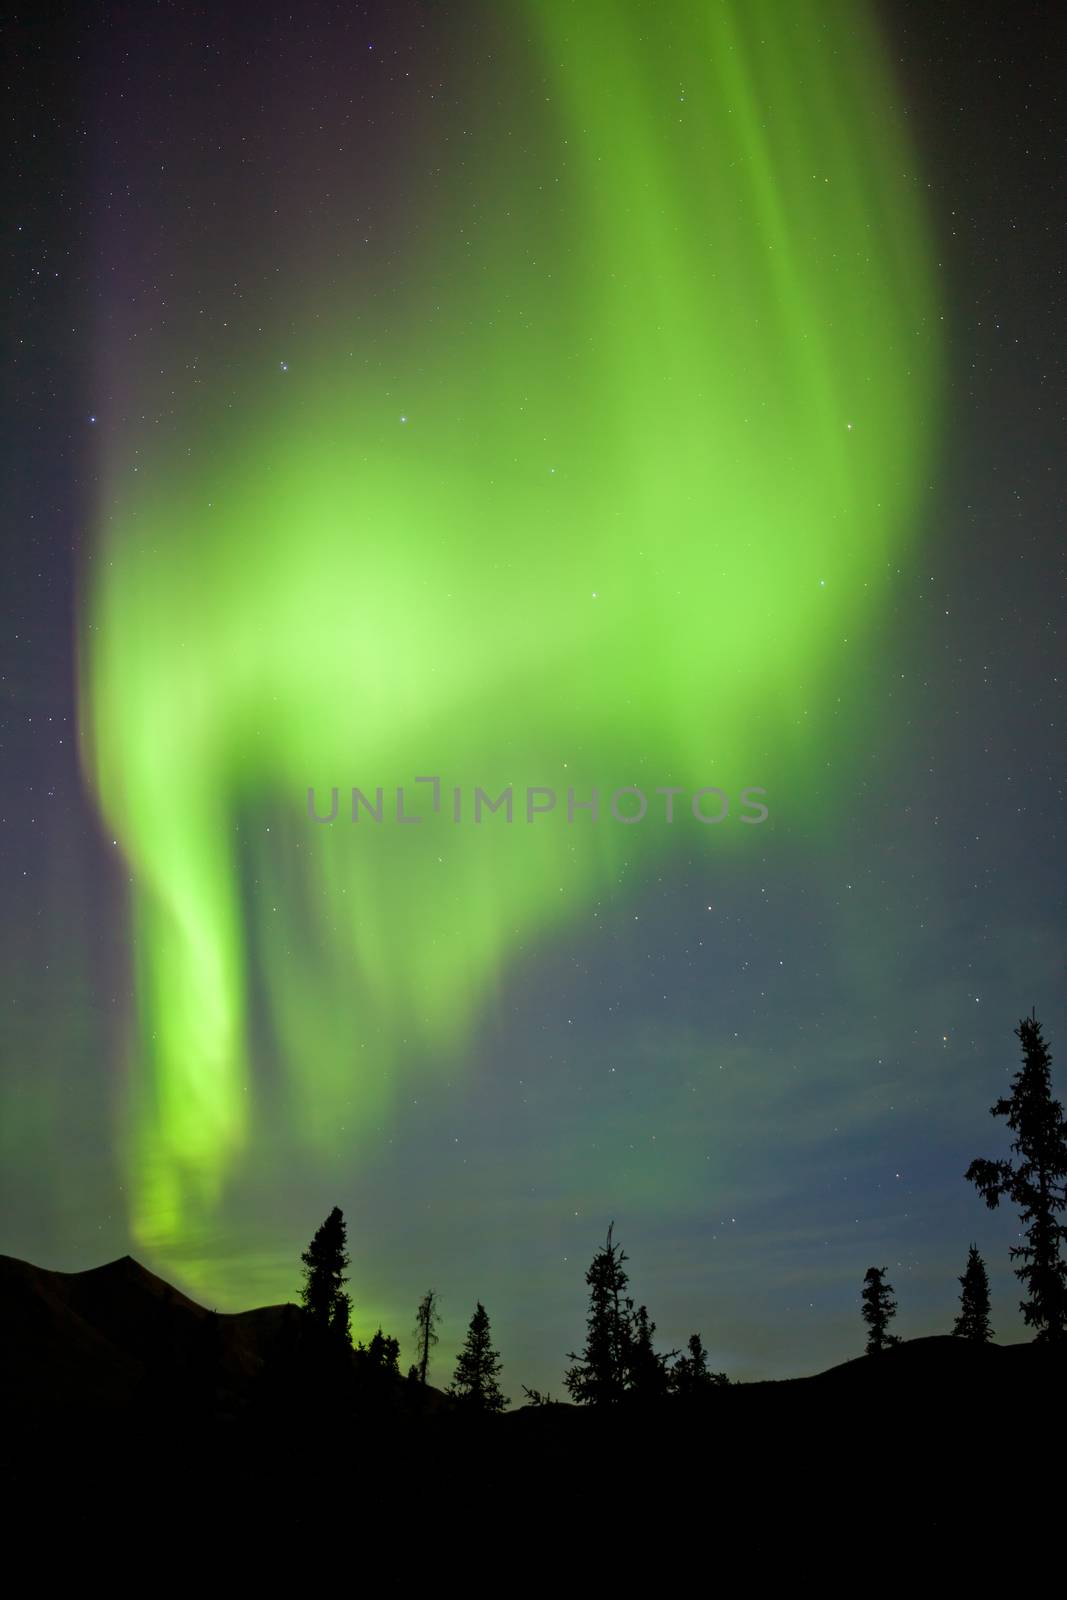 Intense bands of Northern lights or Aurora borealis or Polar lights dancing on night sky over boreal forest spruce trees of Yukon Territory, Canada